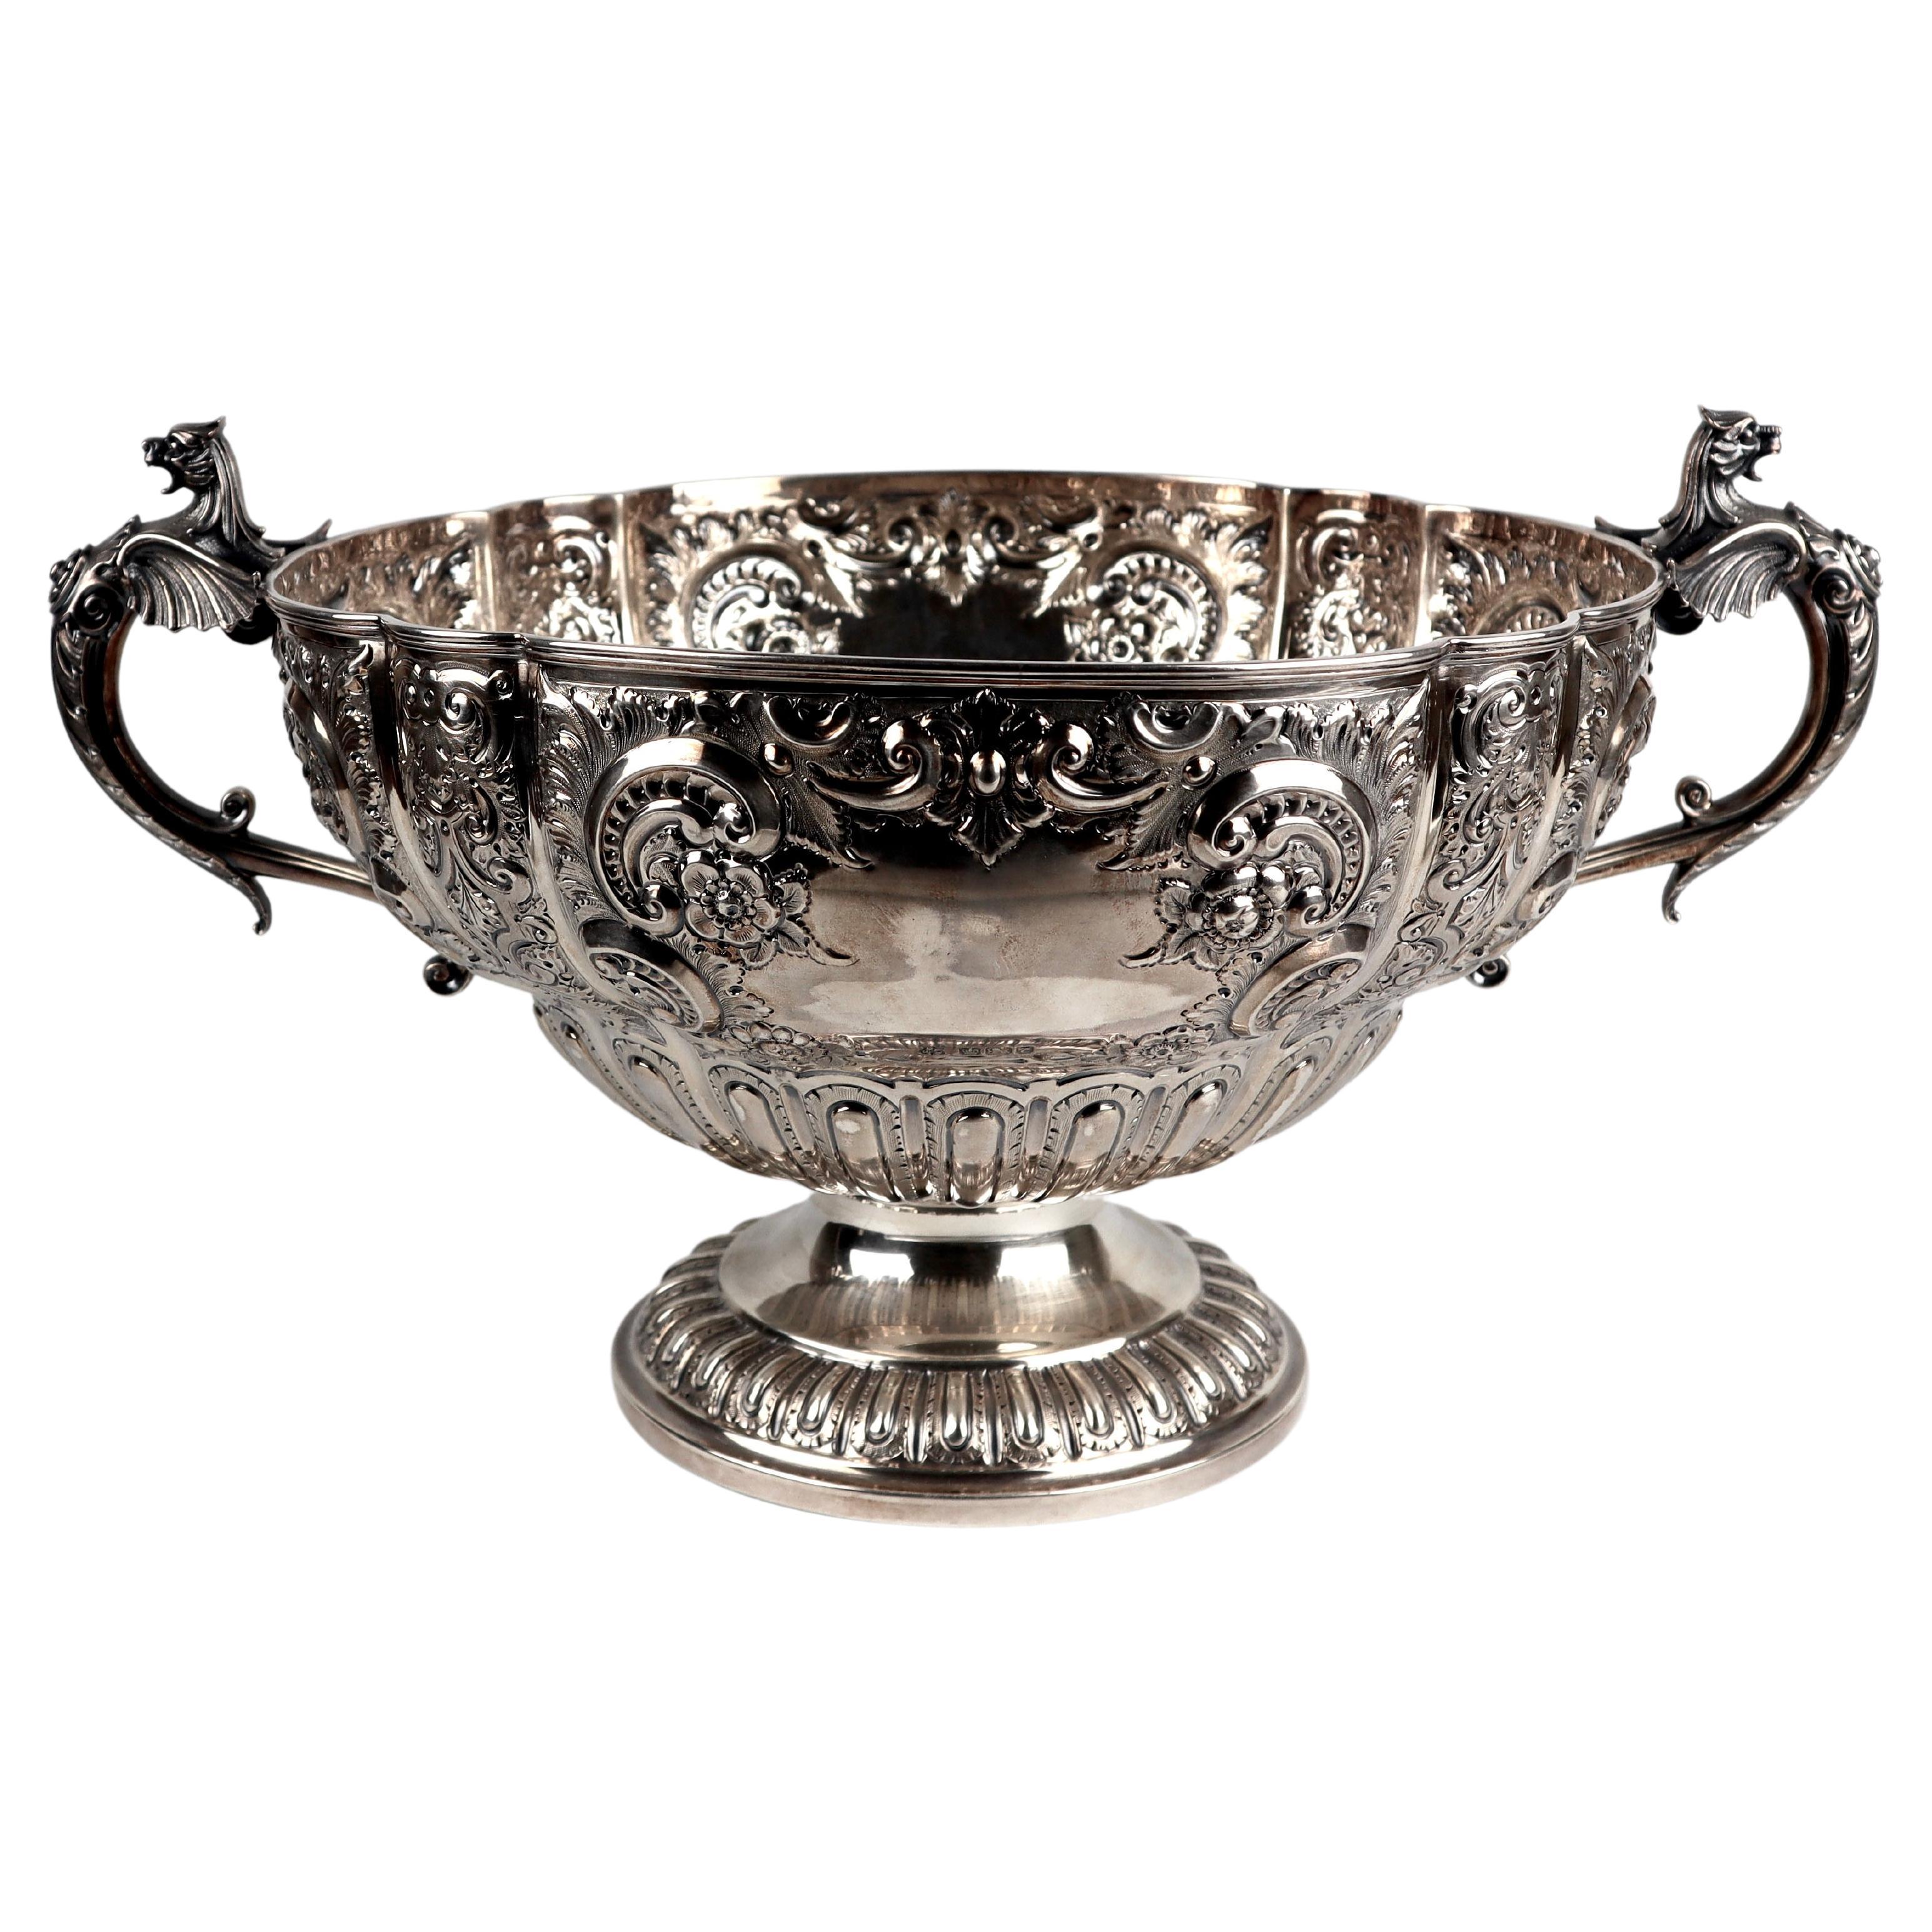 Magnificent Sterling Silver Wine Cooler Punch Bowl